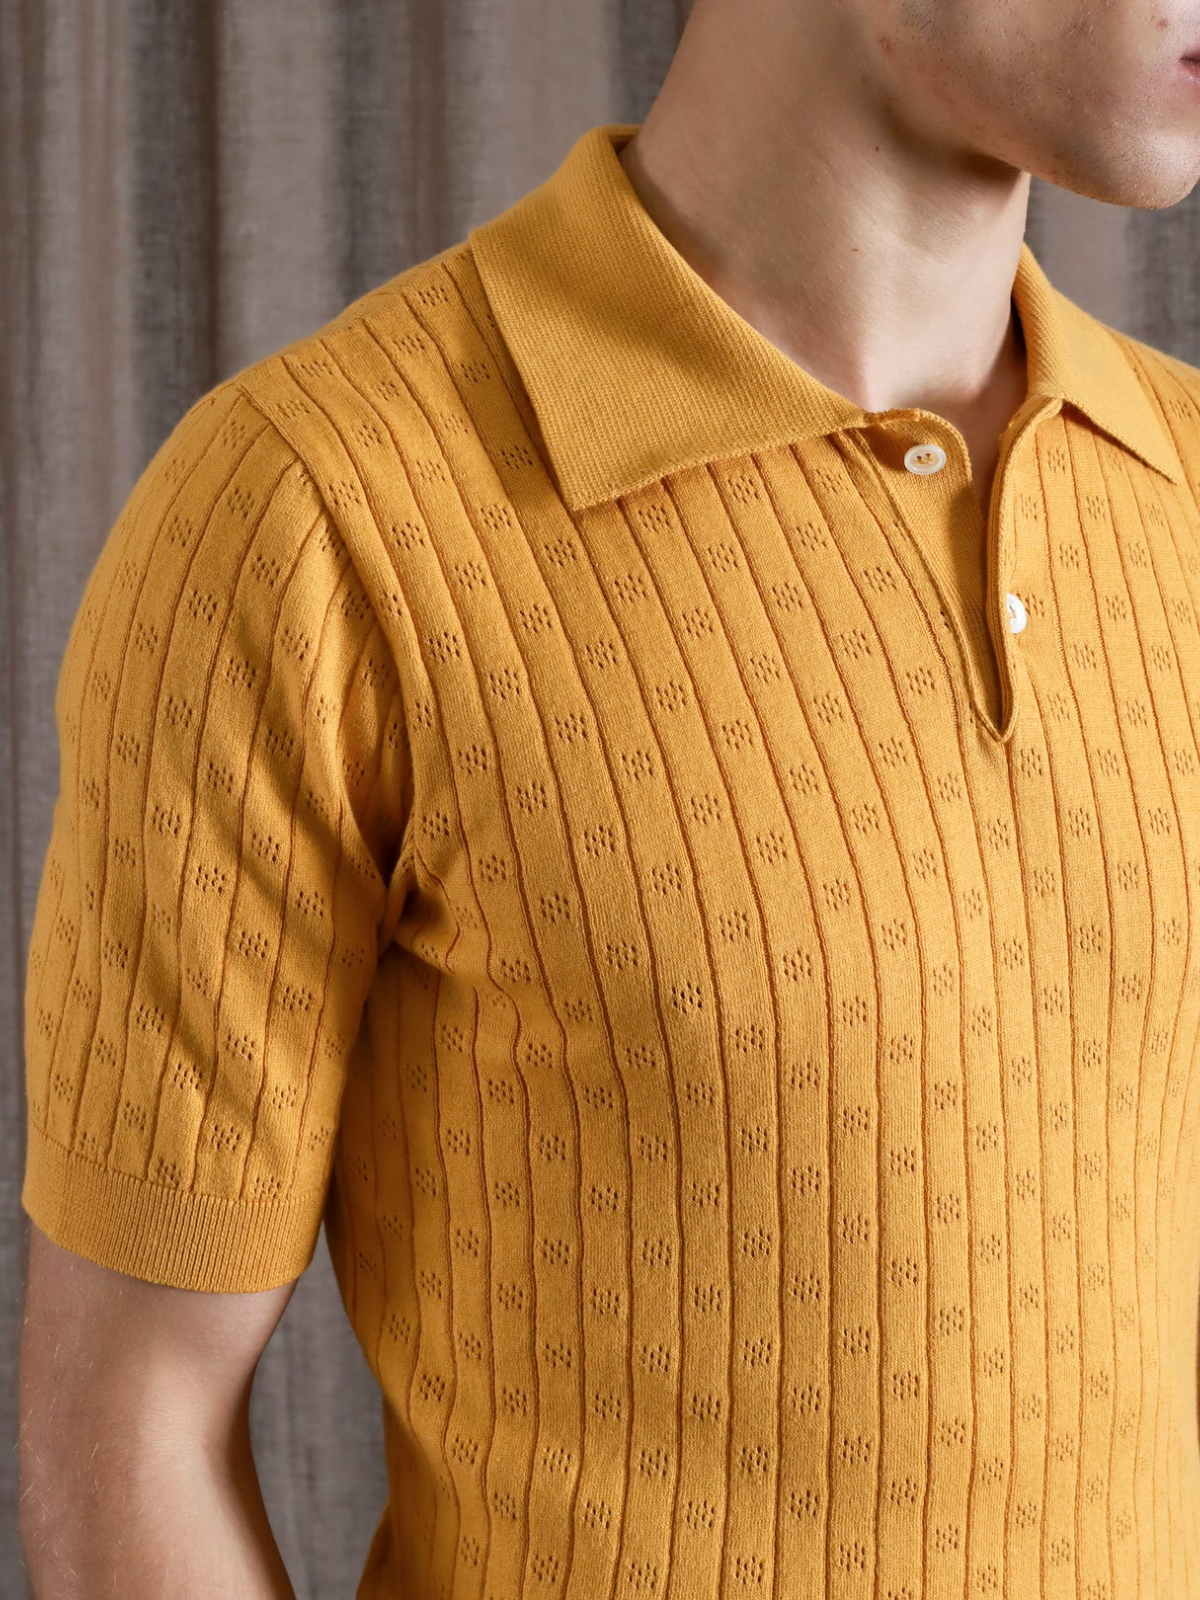 far afield jacobs polo ss short sleeve perforated lace design 100% bci organic cotton honey gold yellow knit sweater polo kempt athens ga georgia men's clothing store